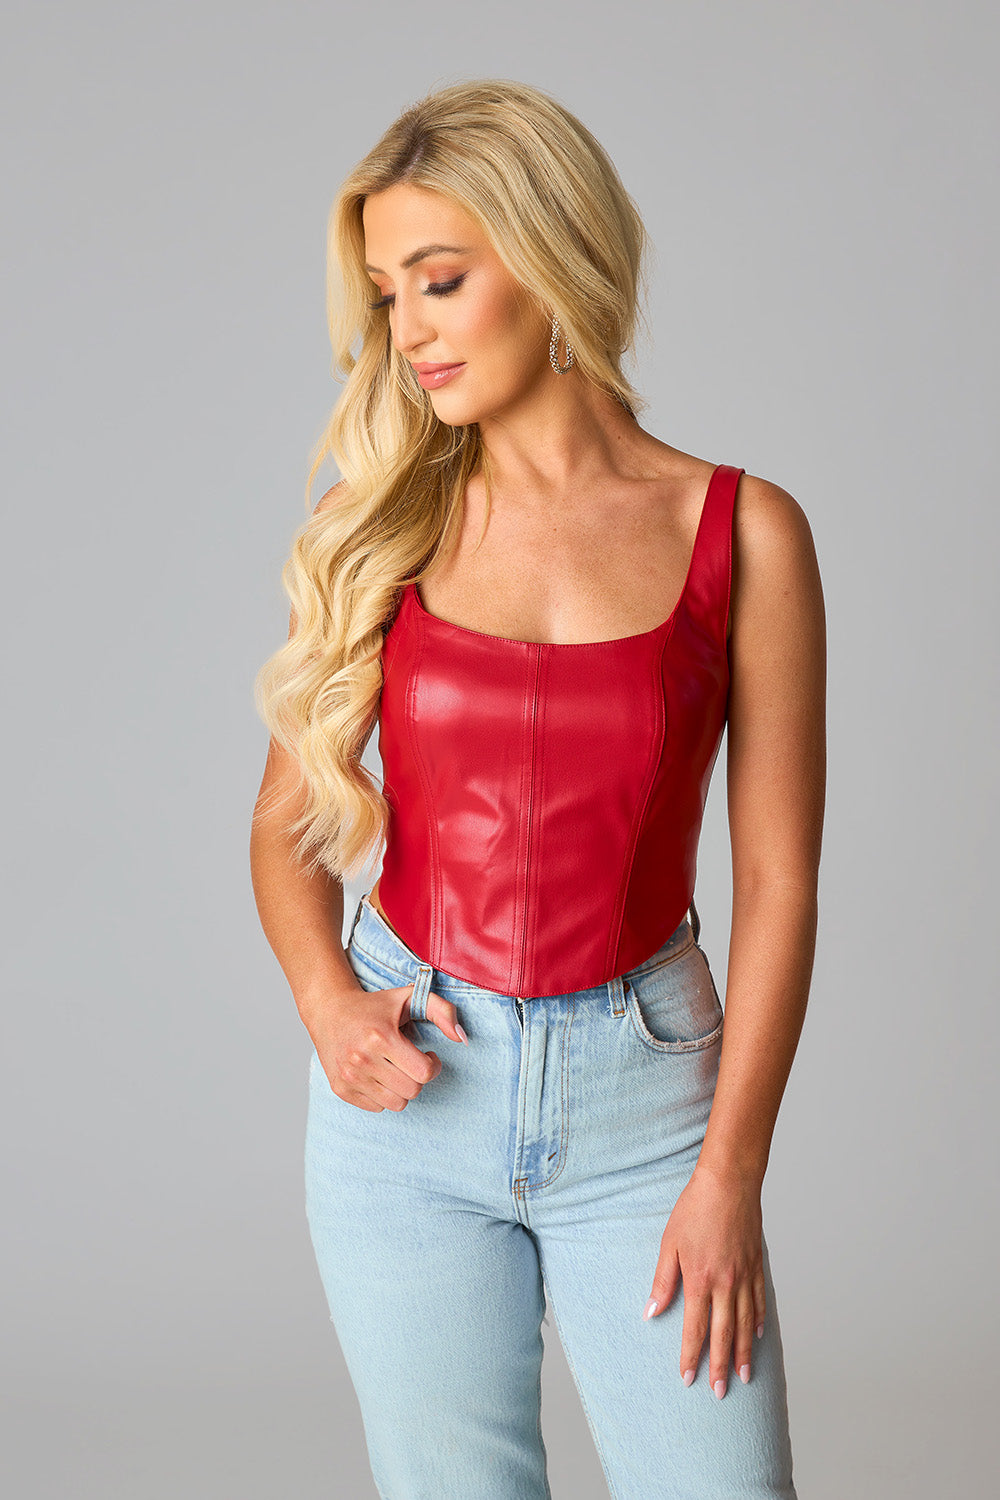 BLACK VEGAN LEATHER CORSET TOP – TOPS BY TAYLOR